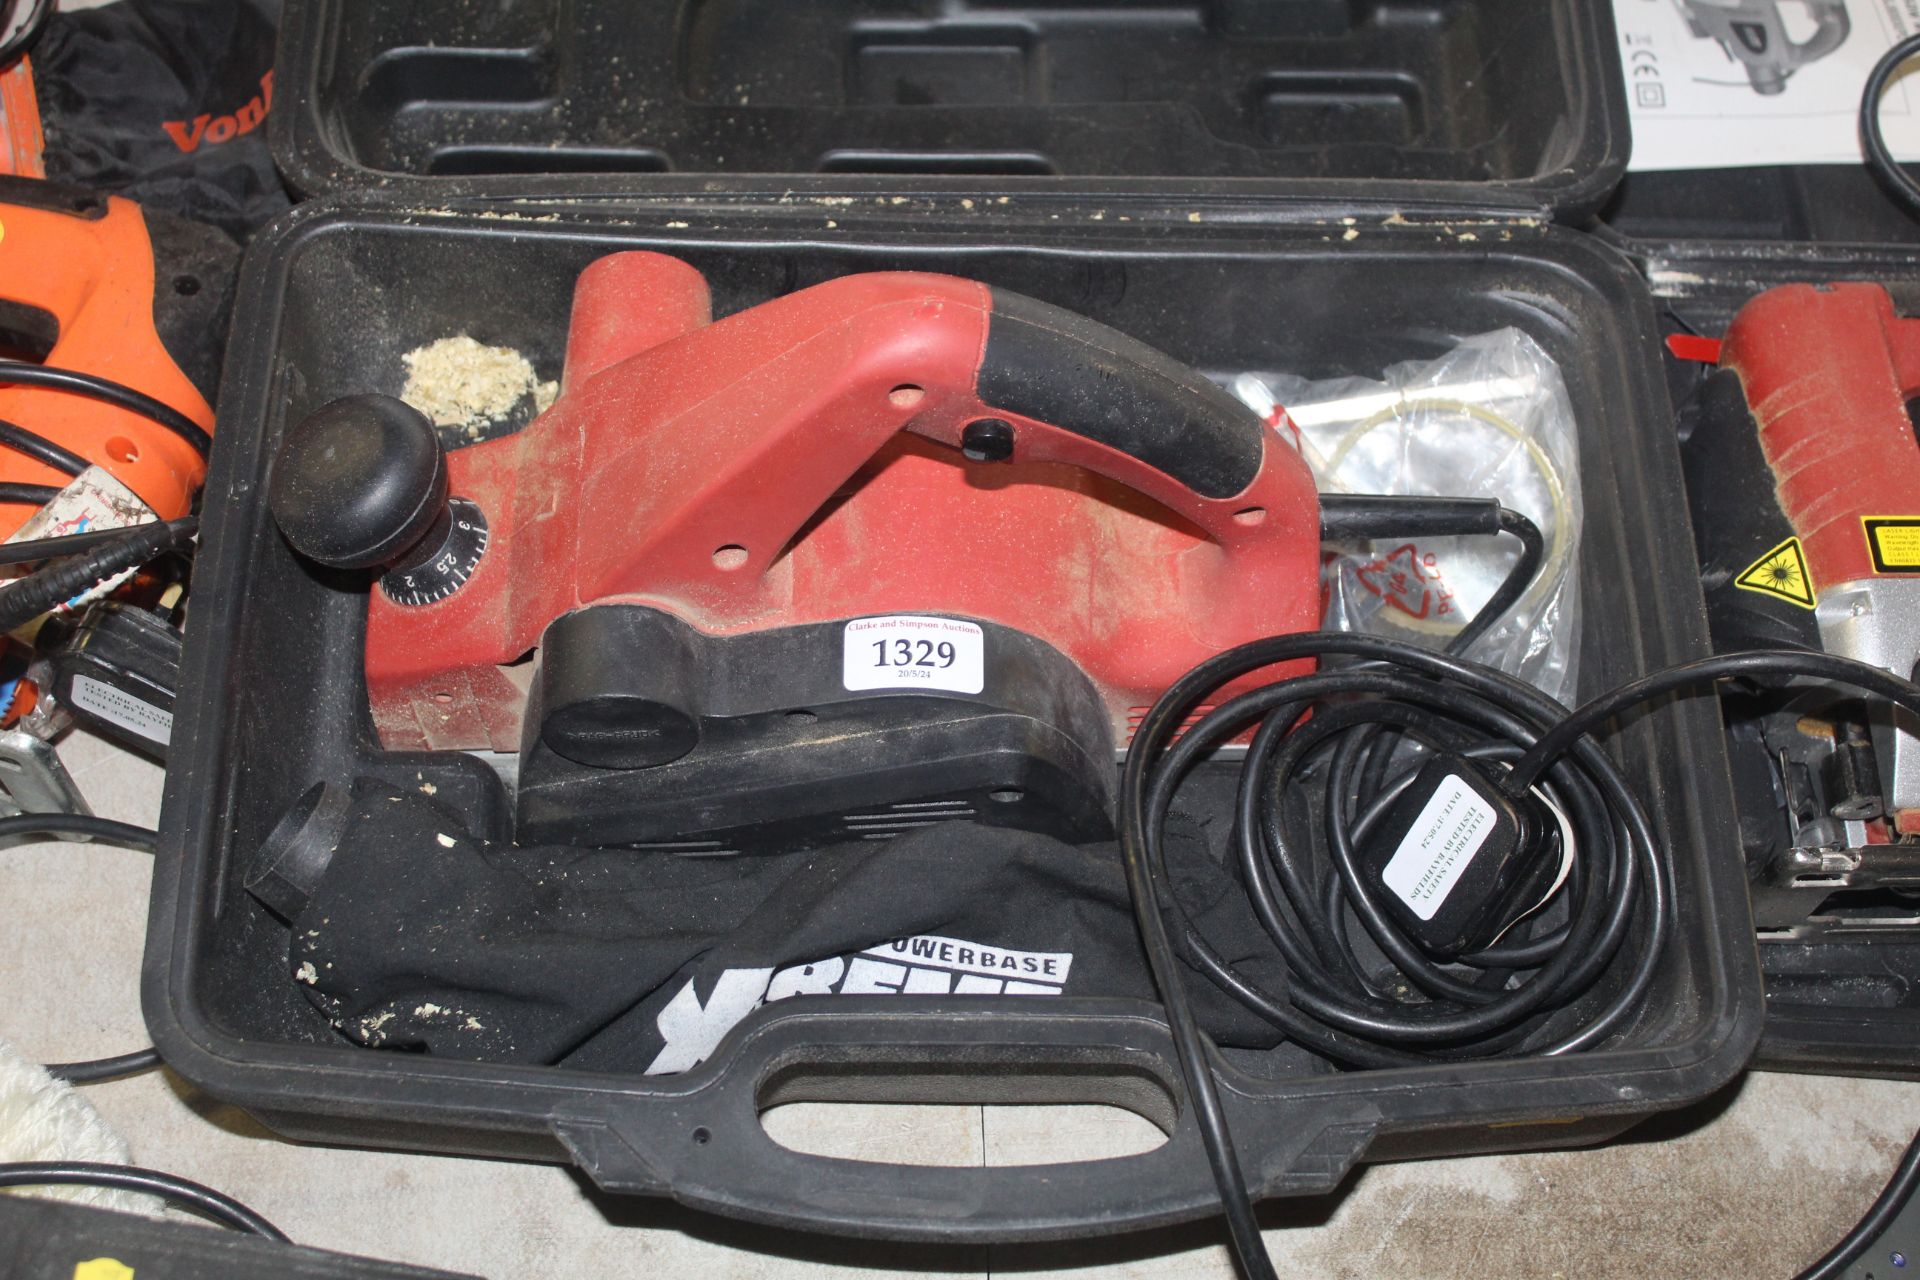 A Xtreme PPLN823N 240v planer in fitted plastic ca